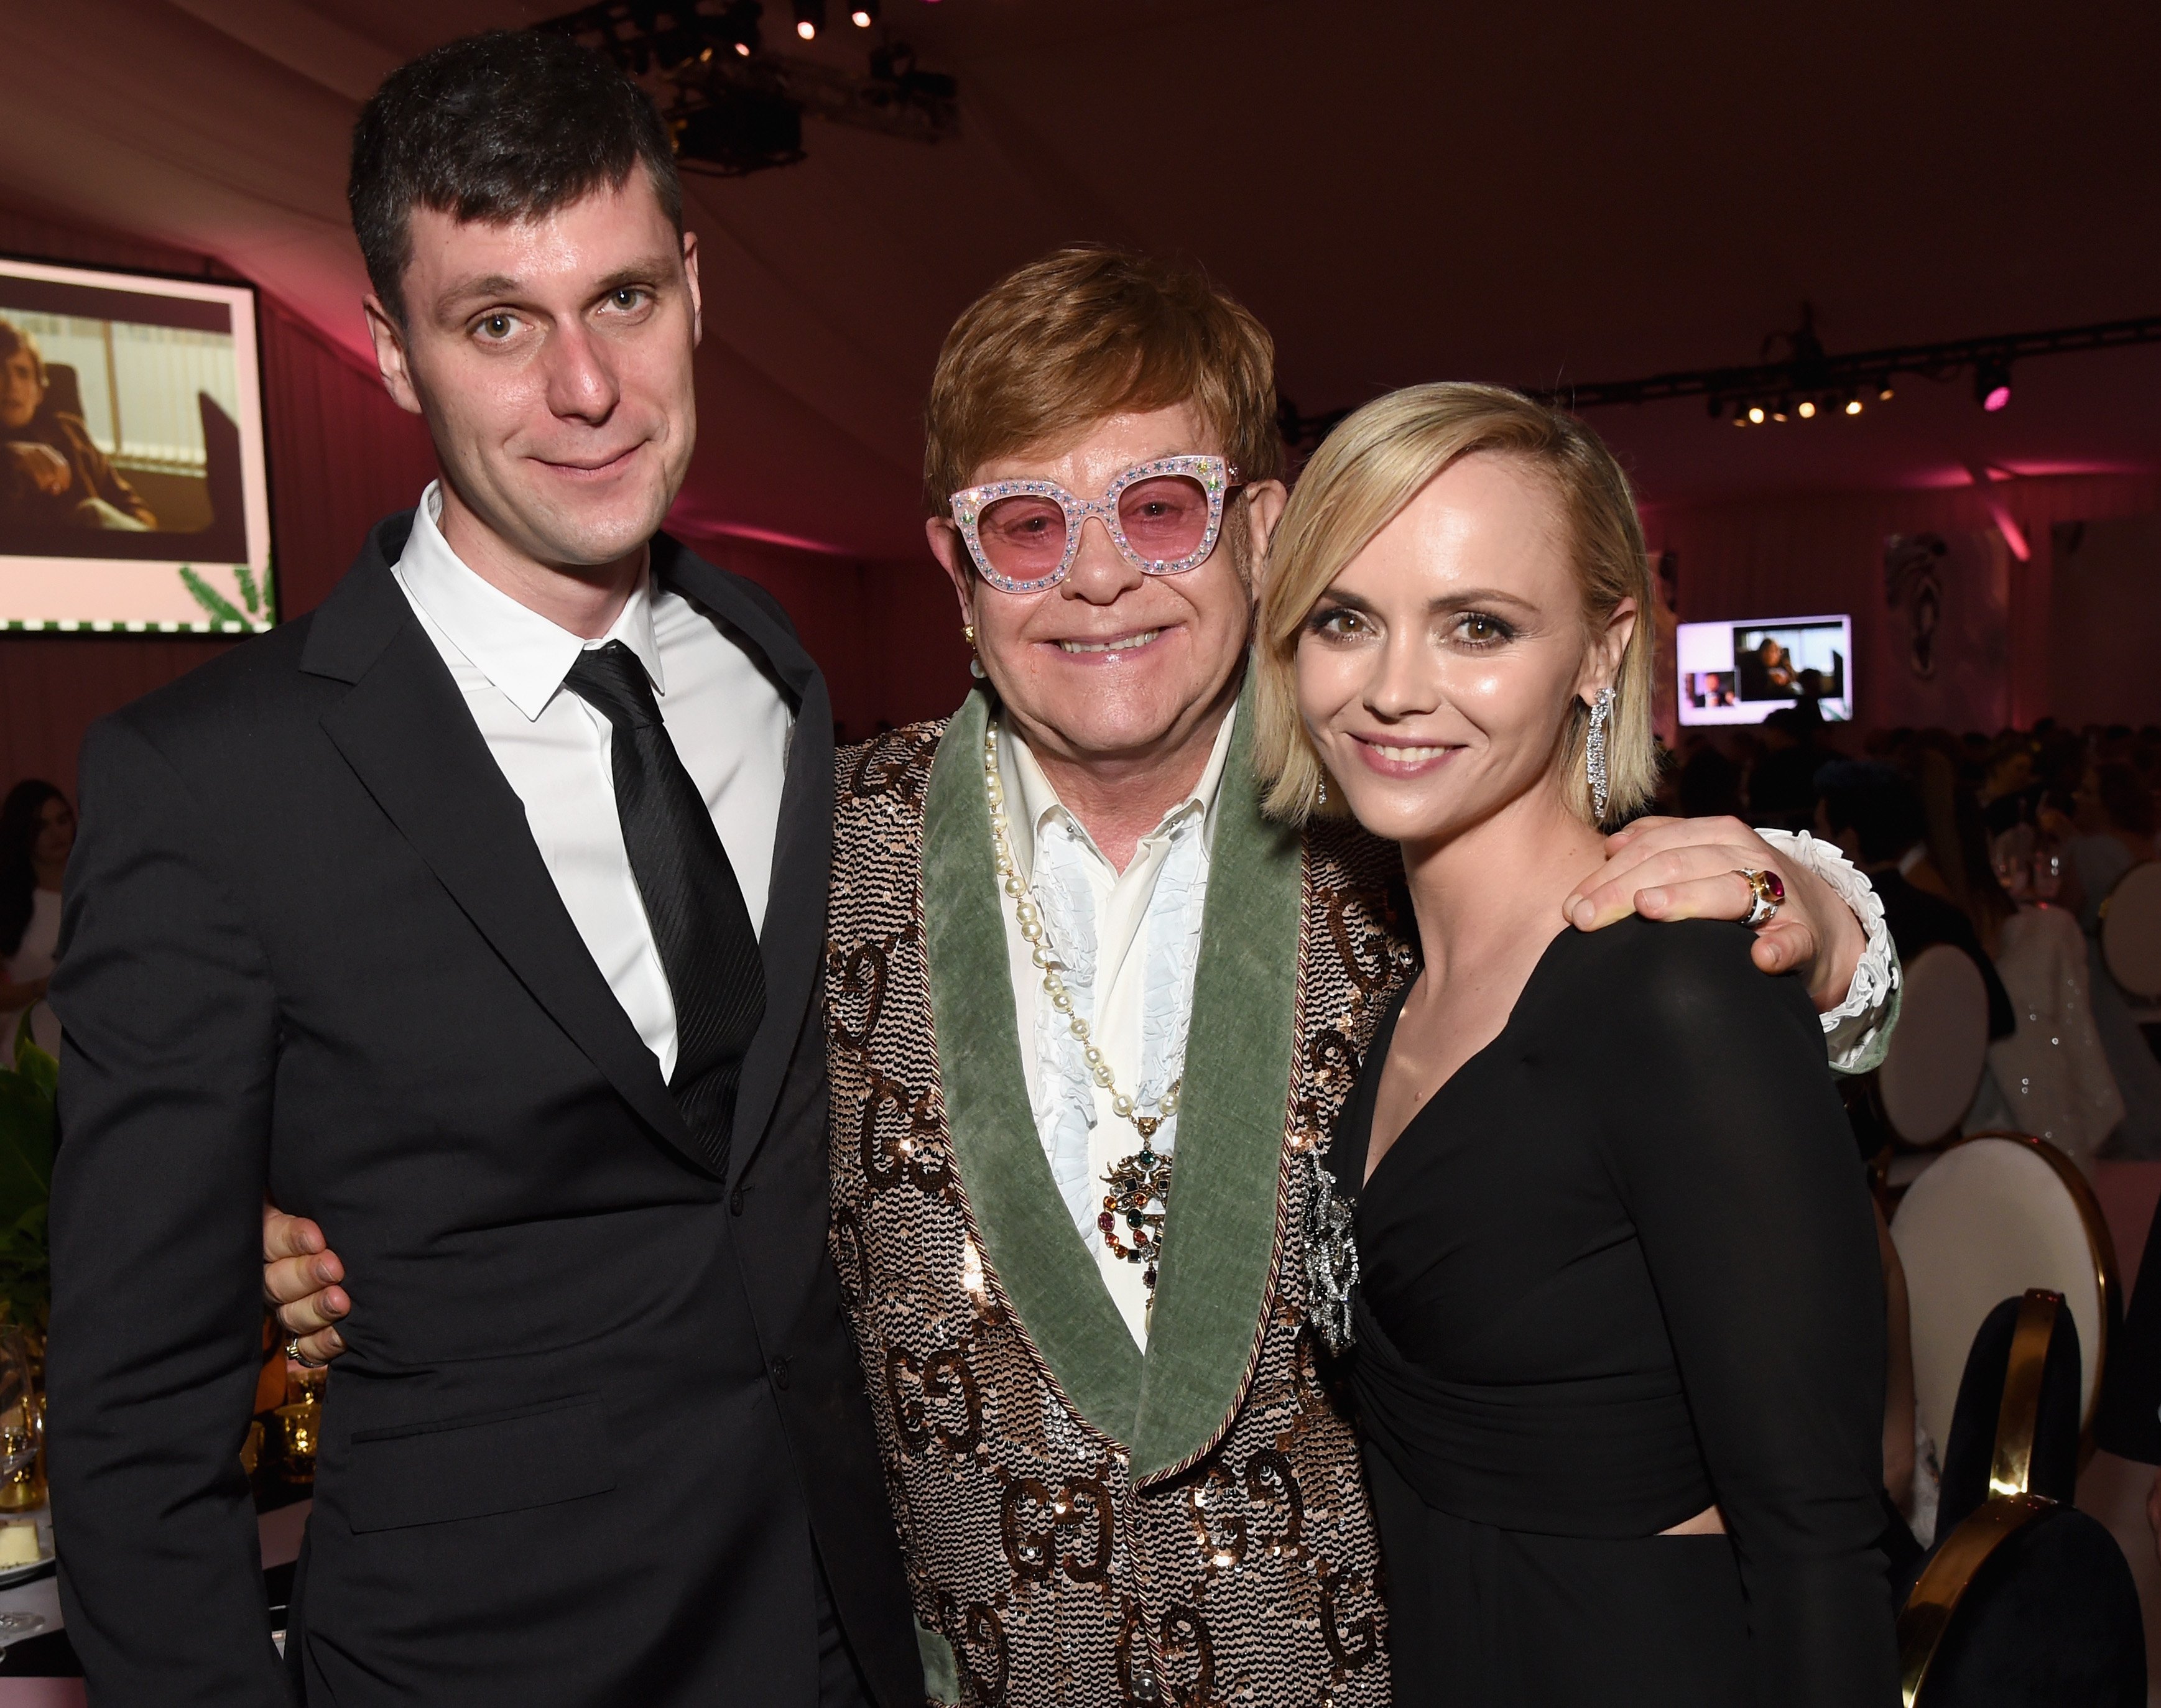 James Heerdegen, Sir Elton John, and Christina Ricci attend the 27th annual Elton John AIDS Foundation Academy Awards Viewing Party on February 24, 2019, in West Hollywood, California. | Source: Getty Images